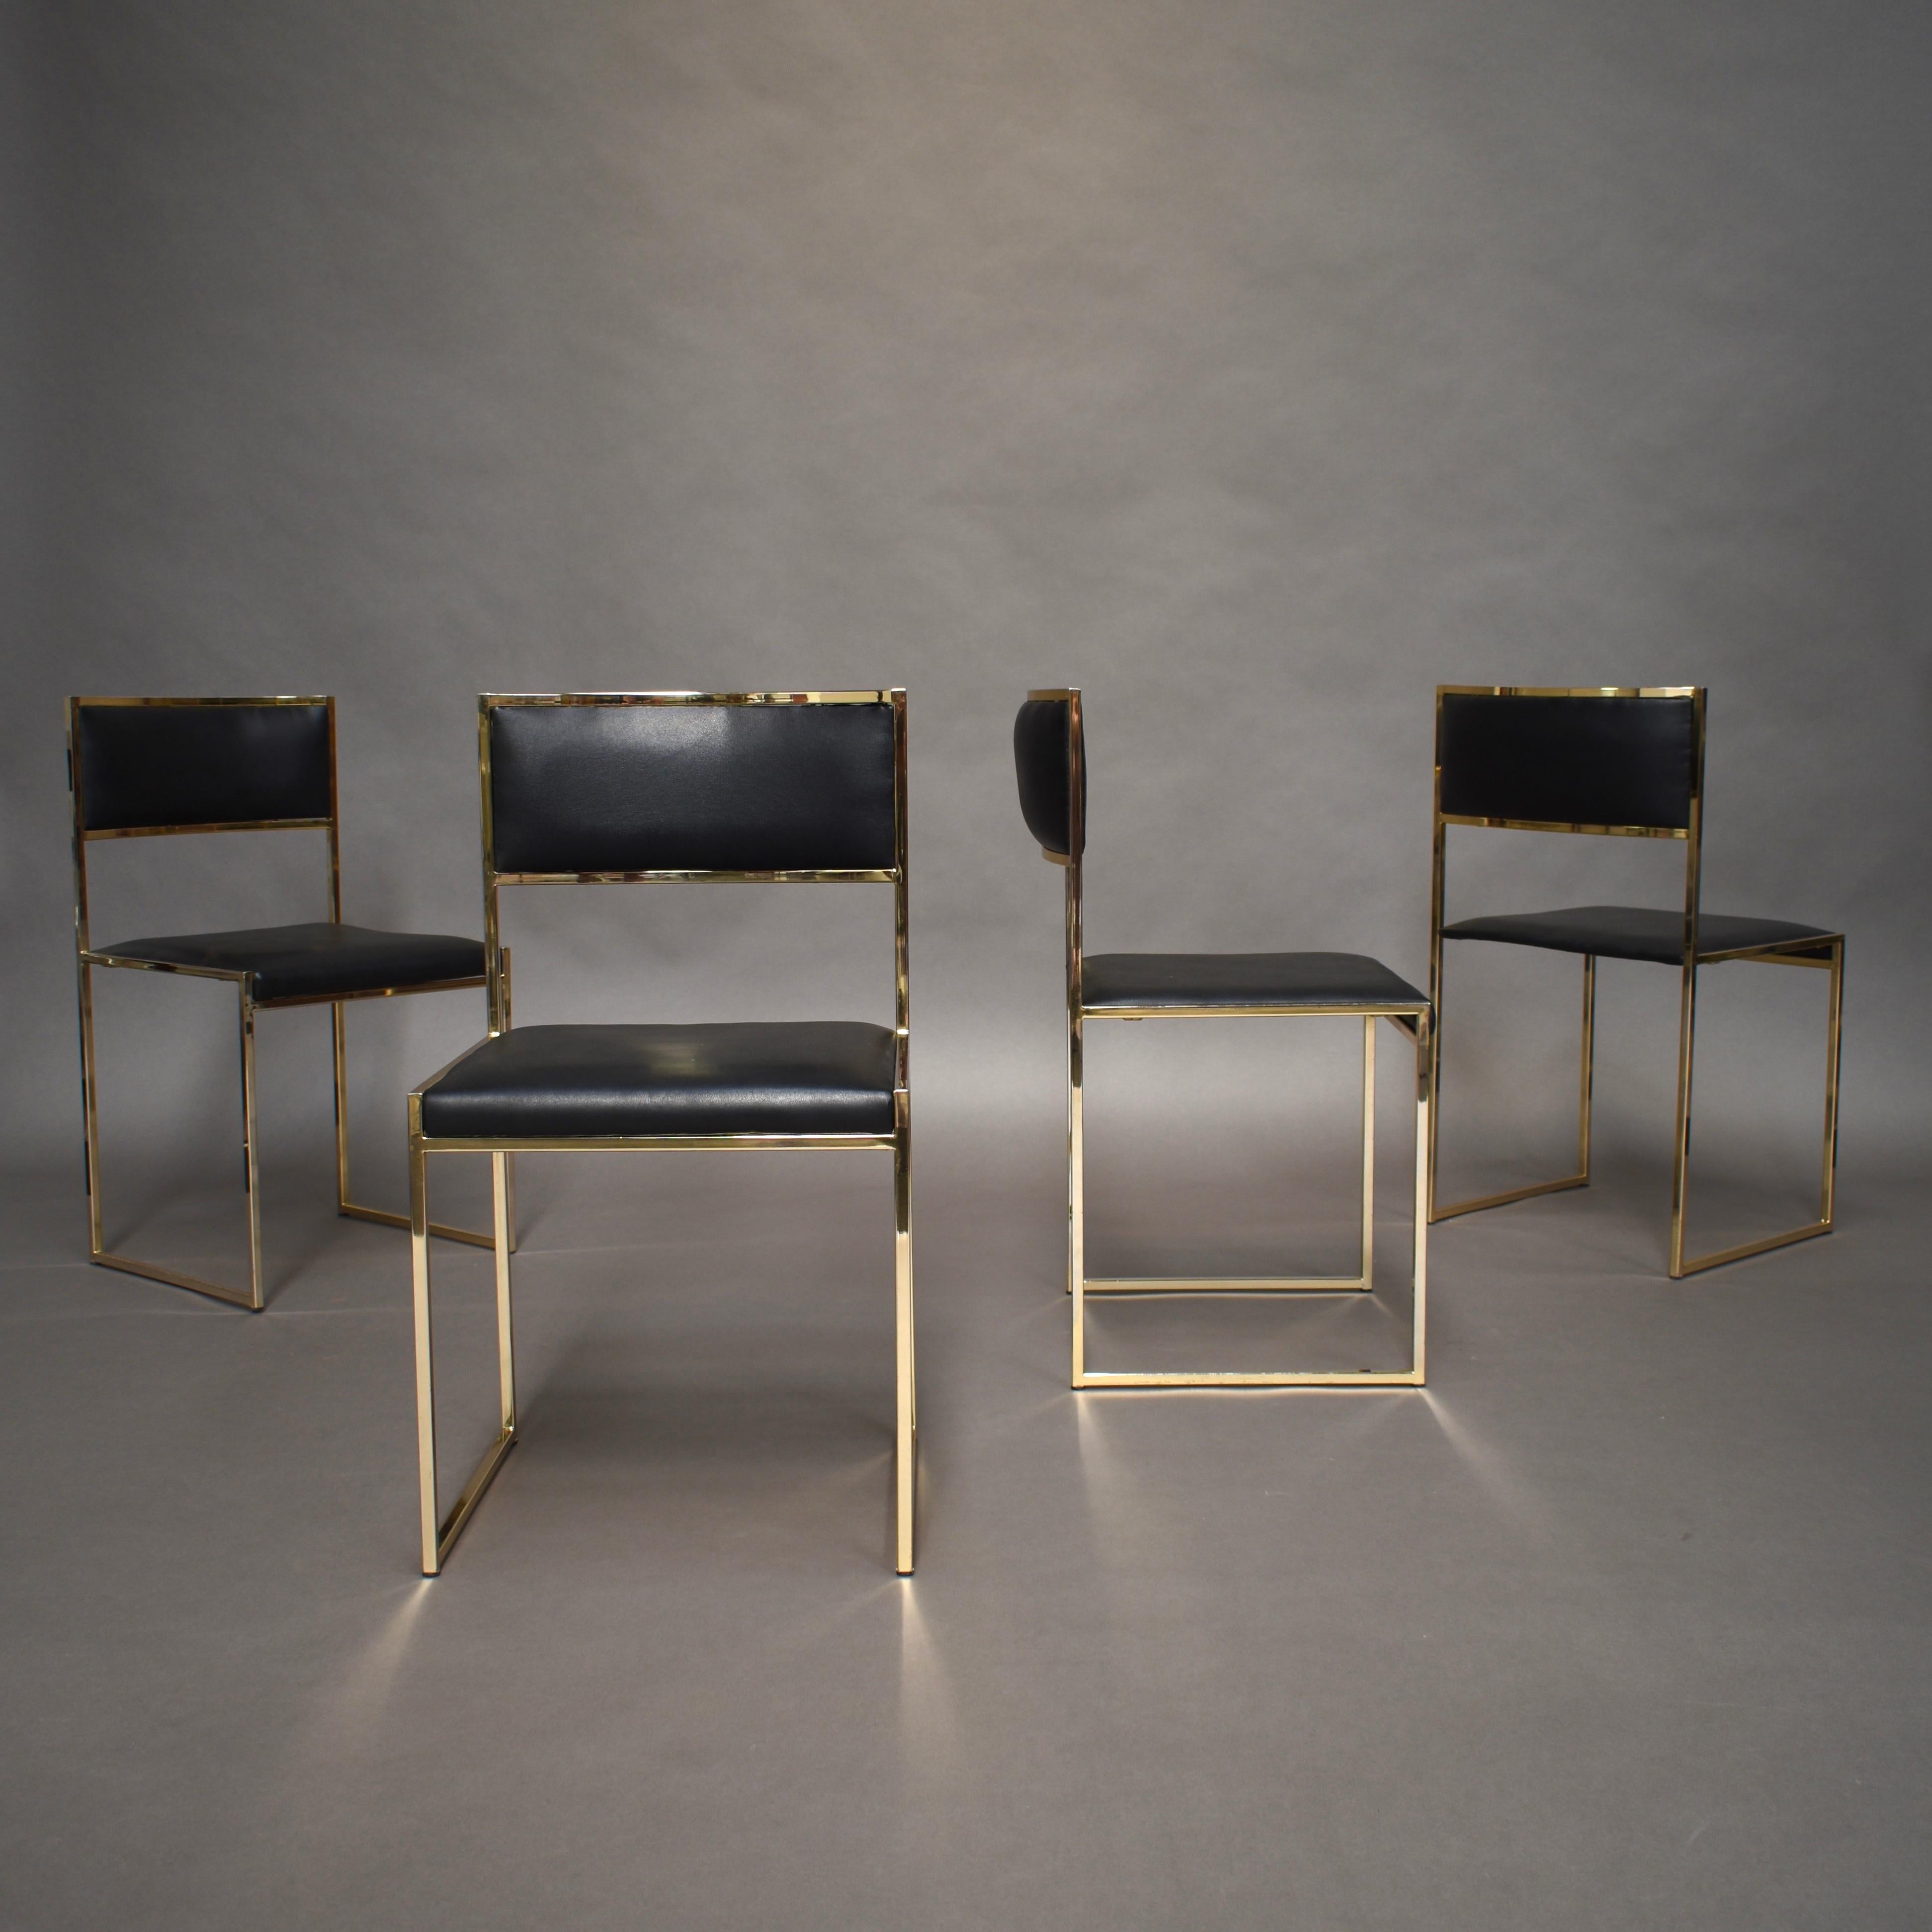 Exclusive and rare set of four gold-plated dining chairs by Willy Rizzo, Italy, circa 1970. Recently imported from Milan.

The chairs have been taken apart and completely polished to give them the original look back. Seats and backrests have been